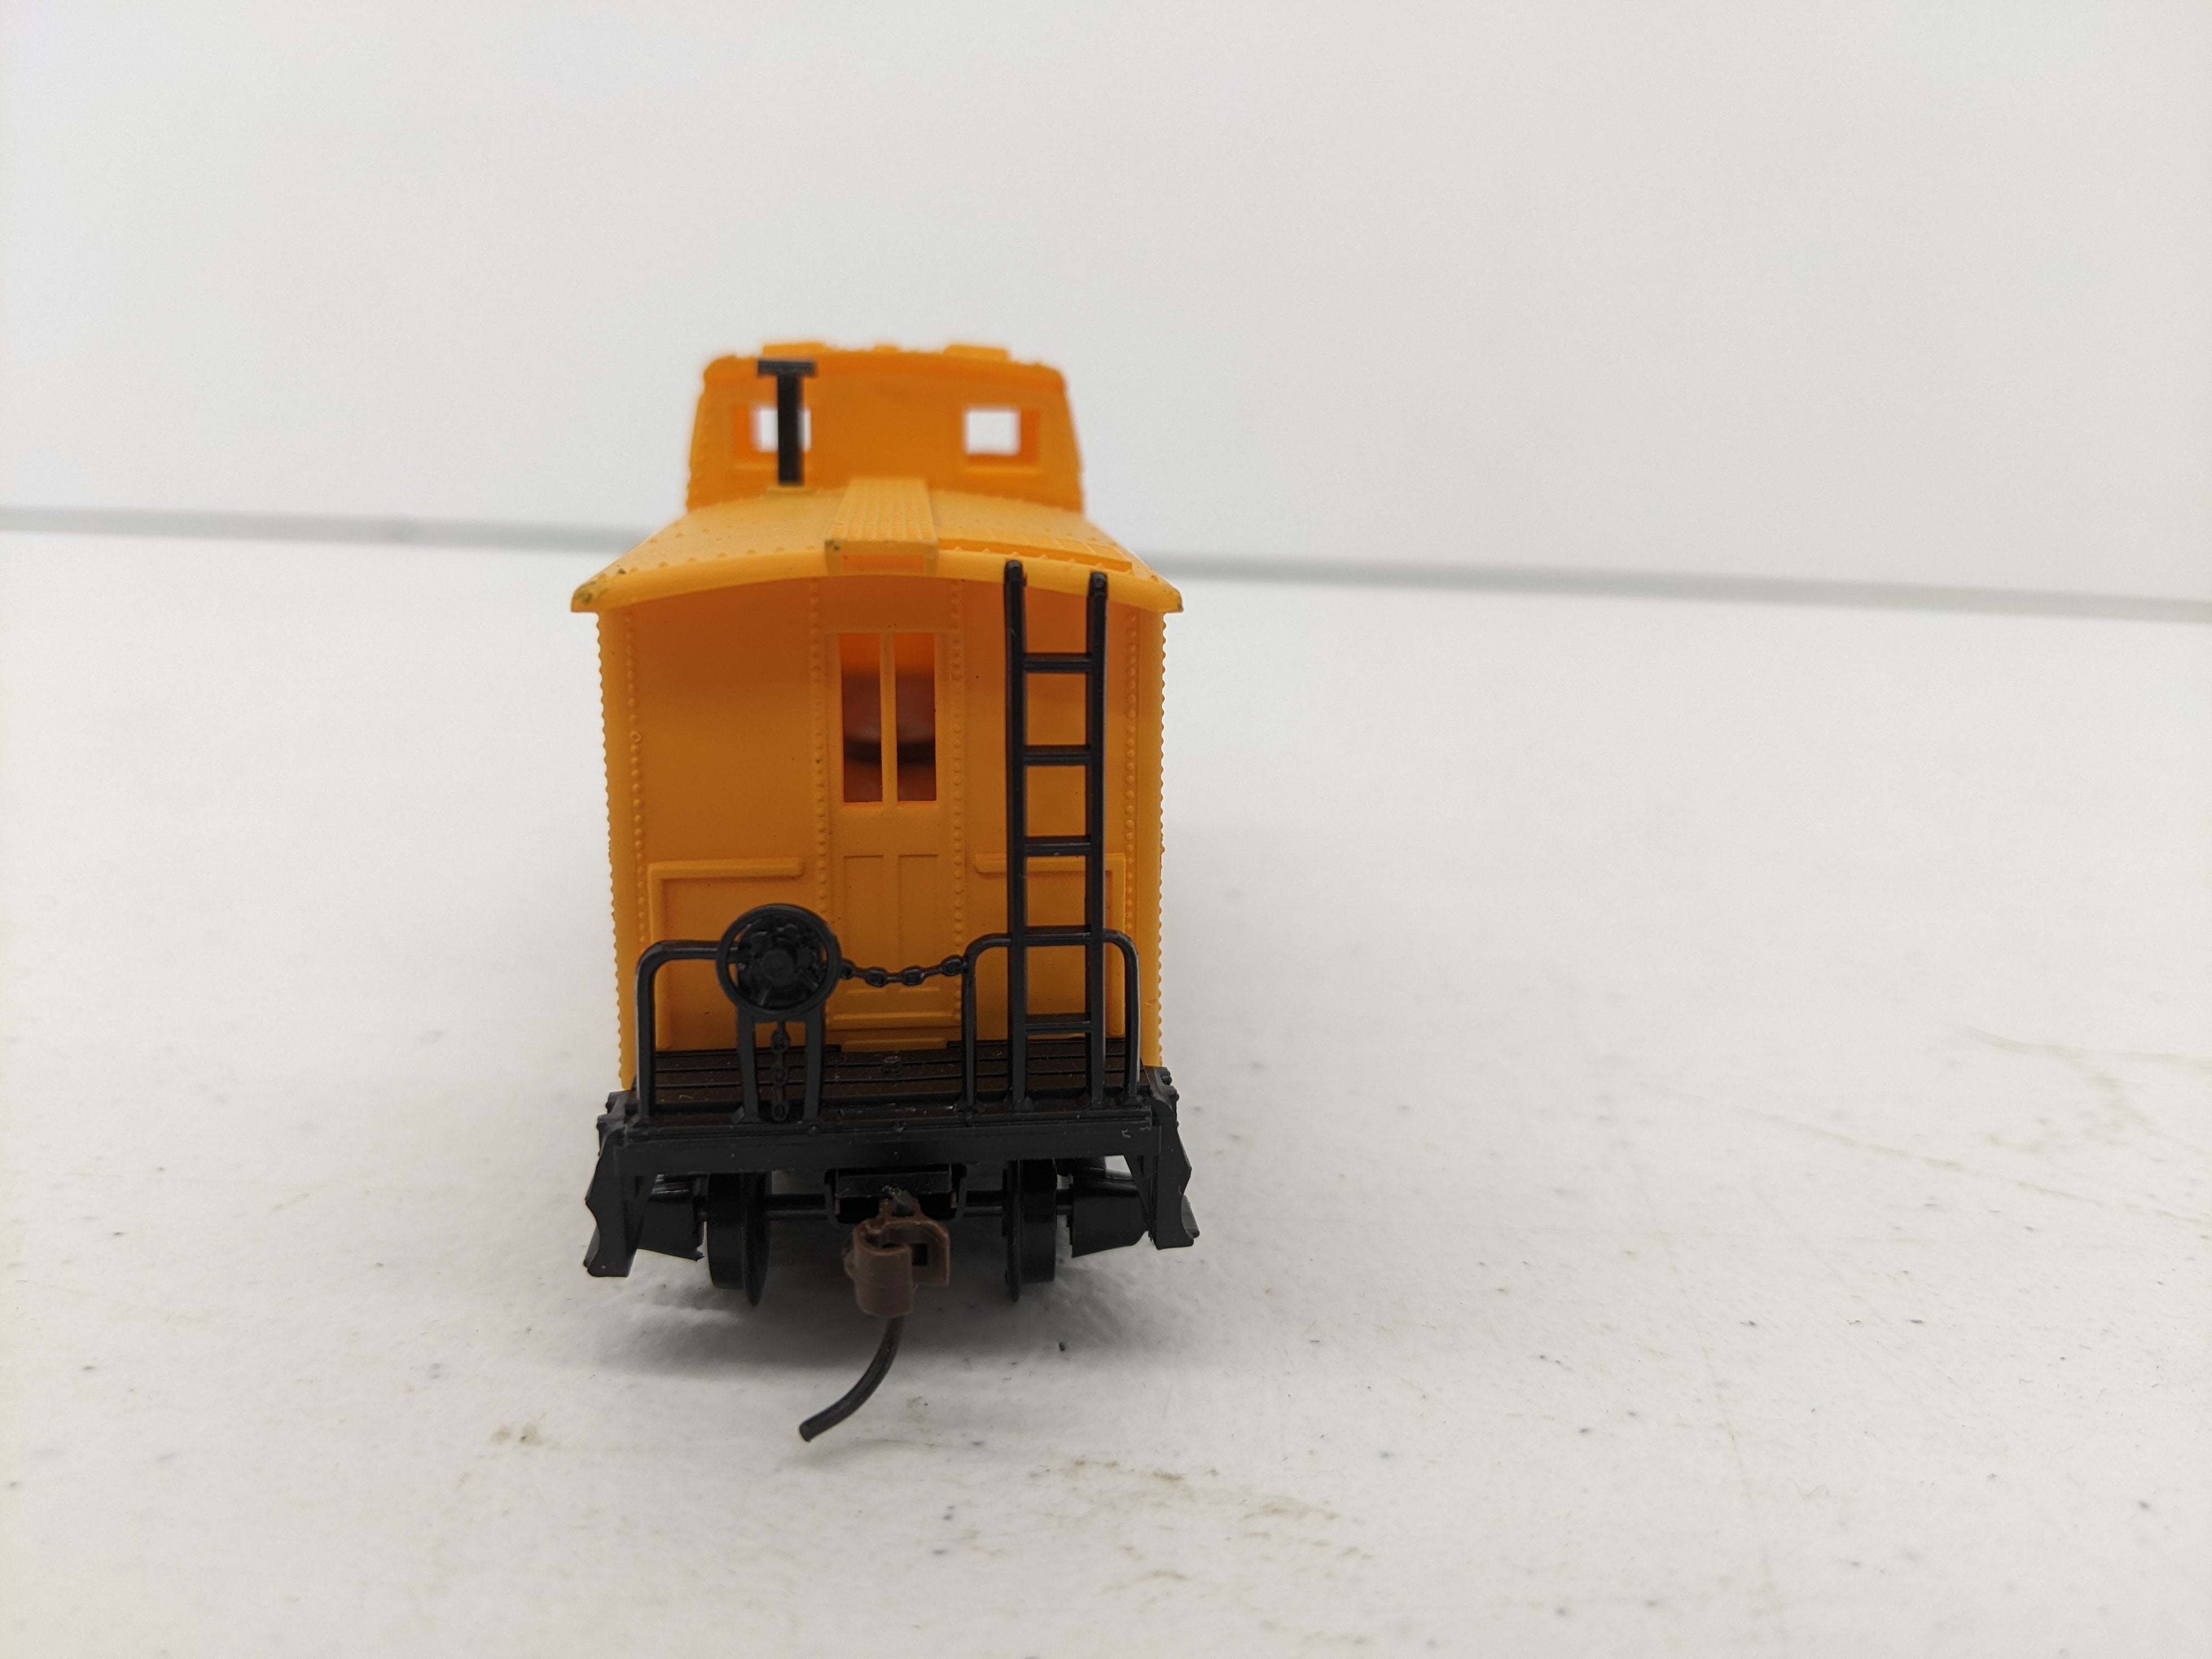 USED Mantua HO Scale, 36' Caboose, Union Pacific UP #716, Heavy